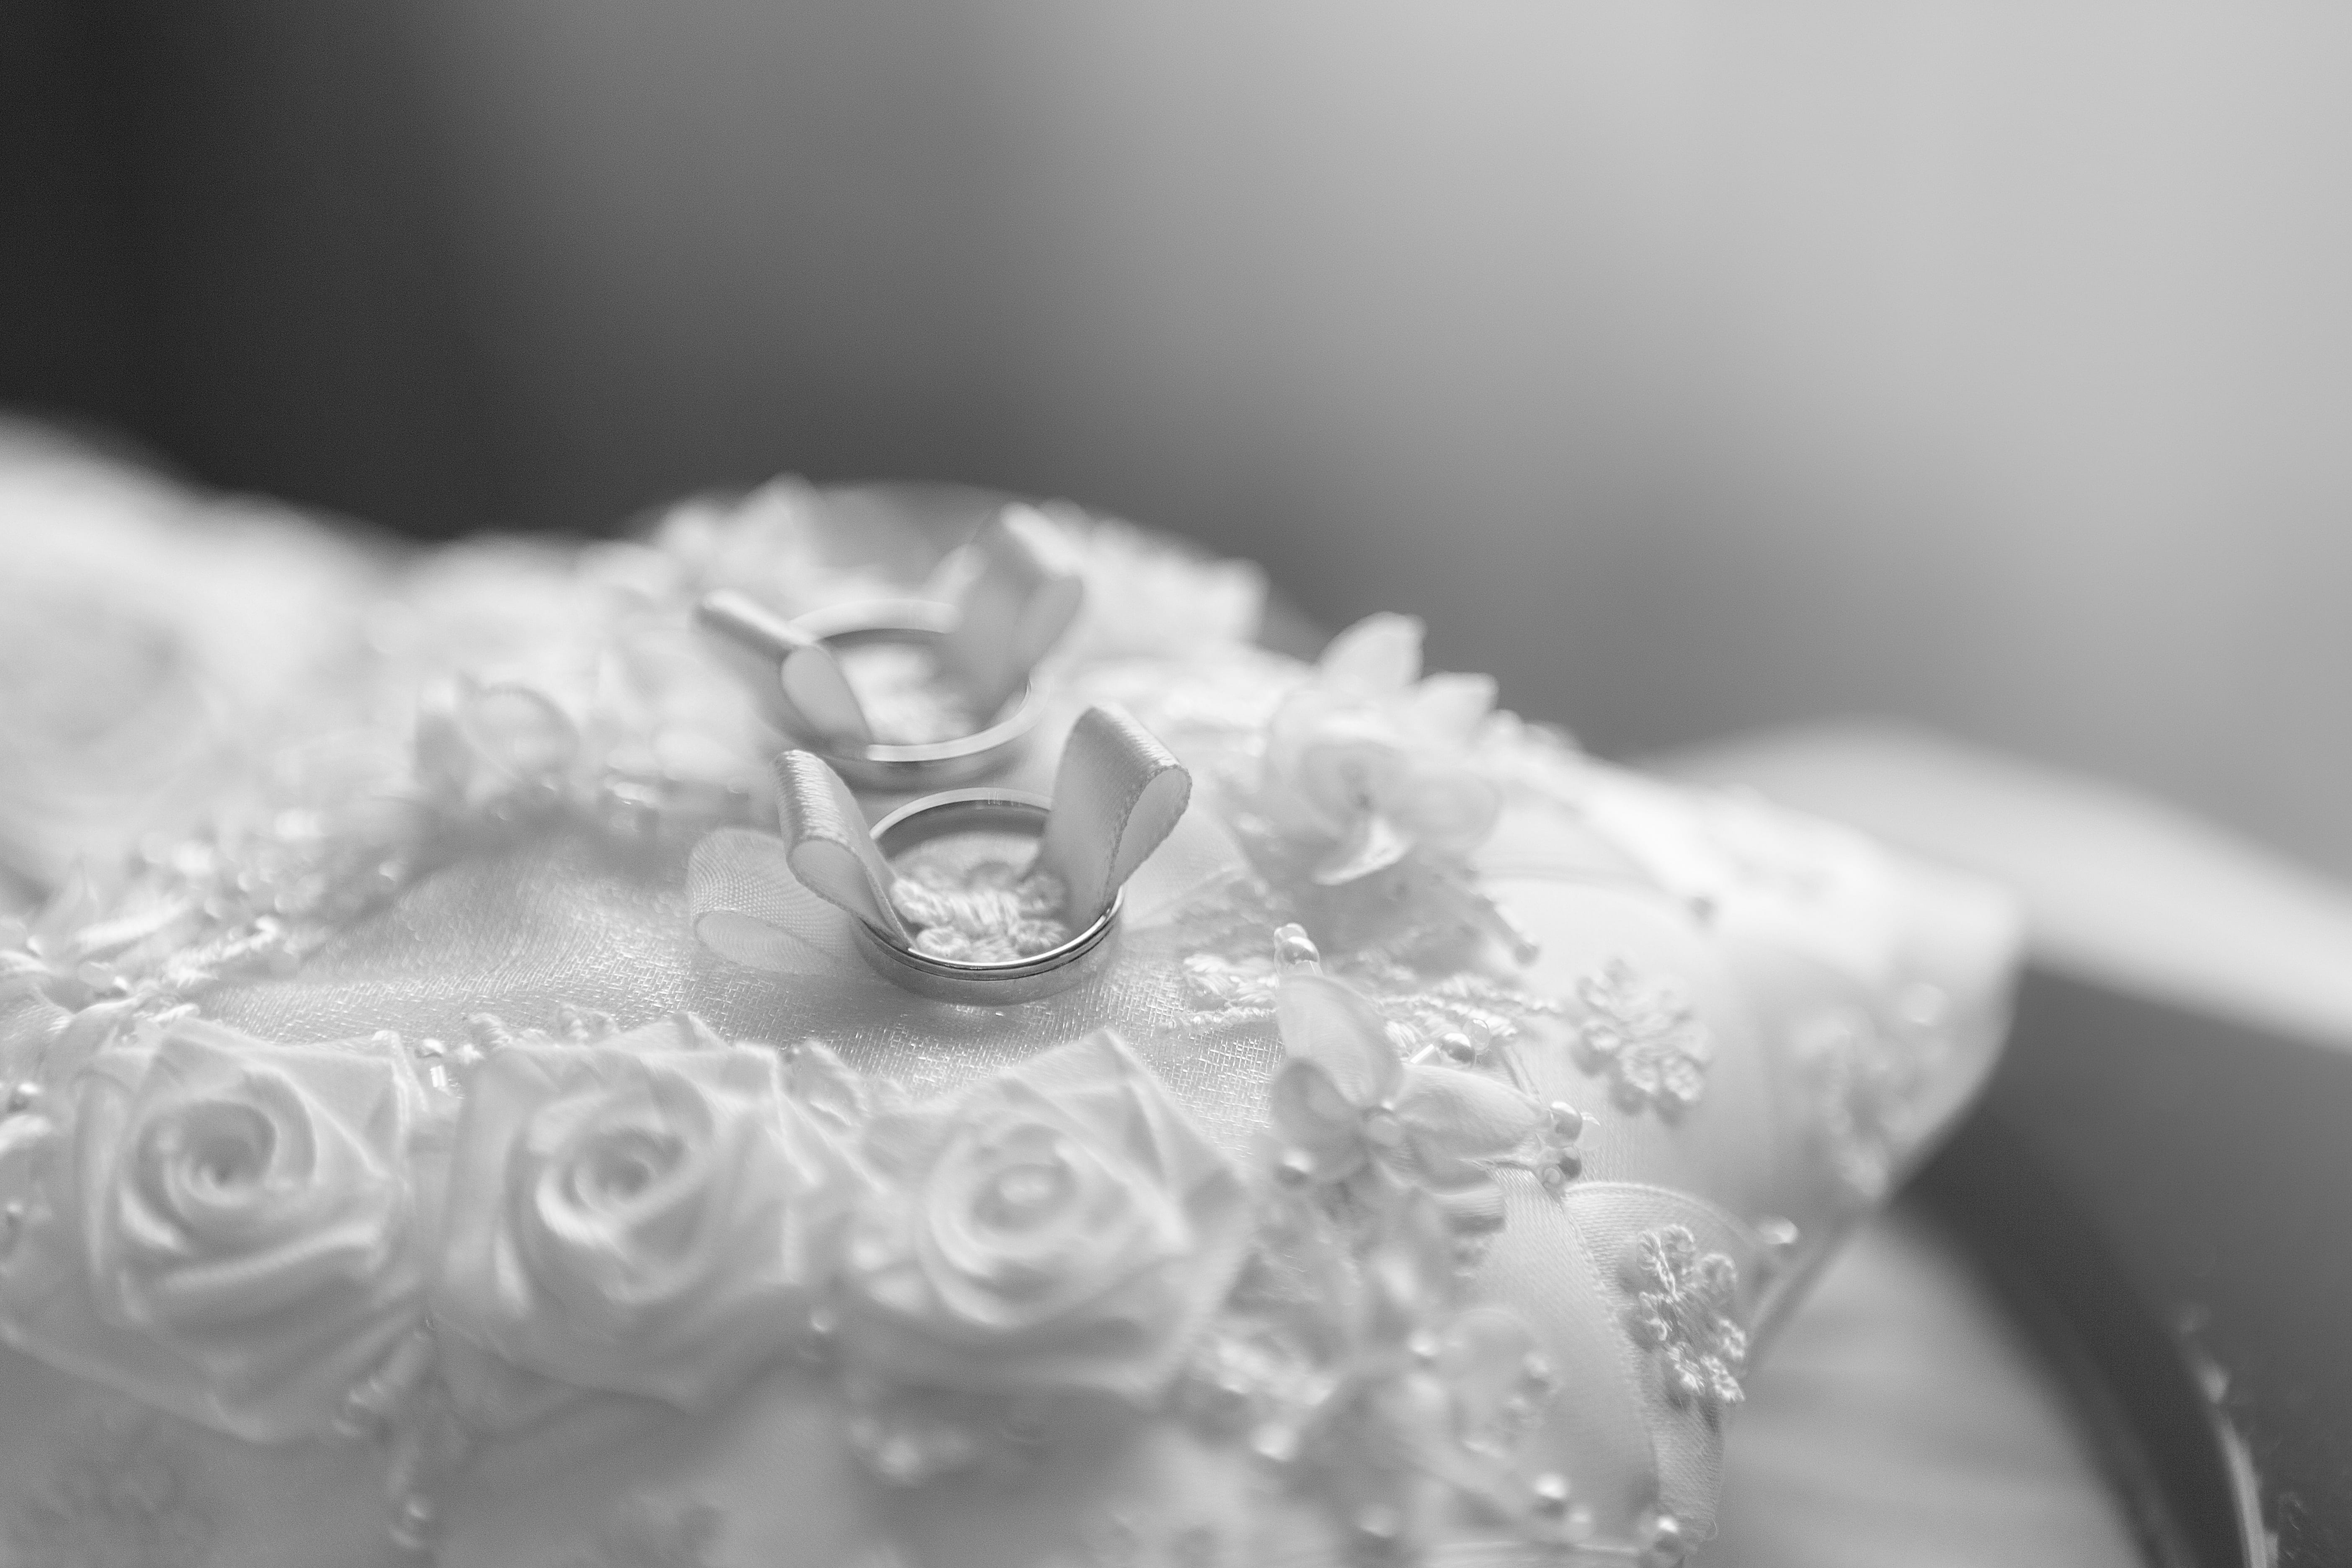 selective focus photo of silver-colored bridal ring on white lace pillow